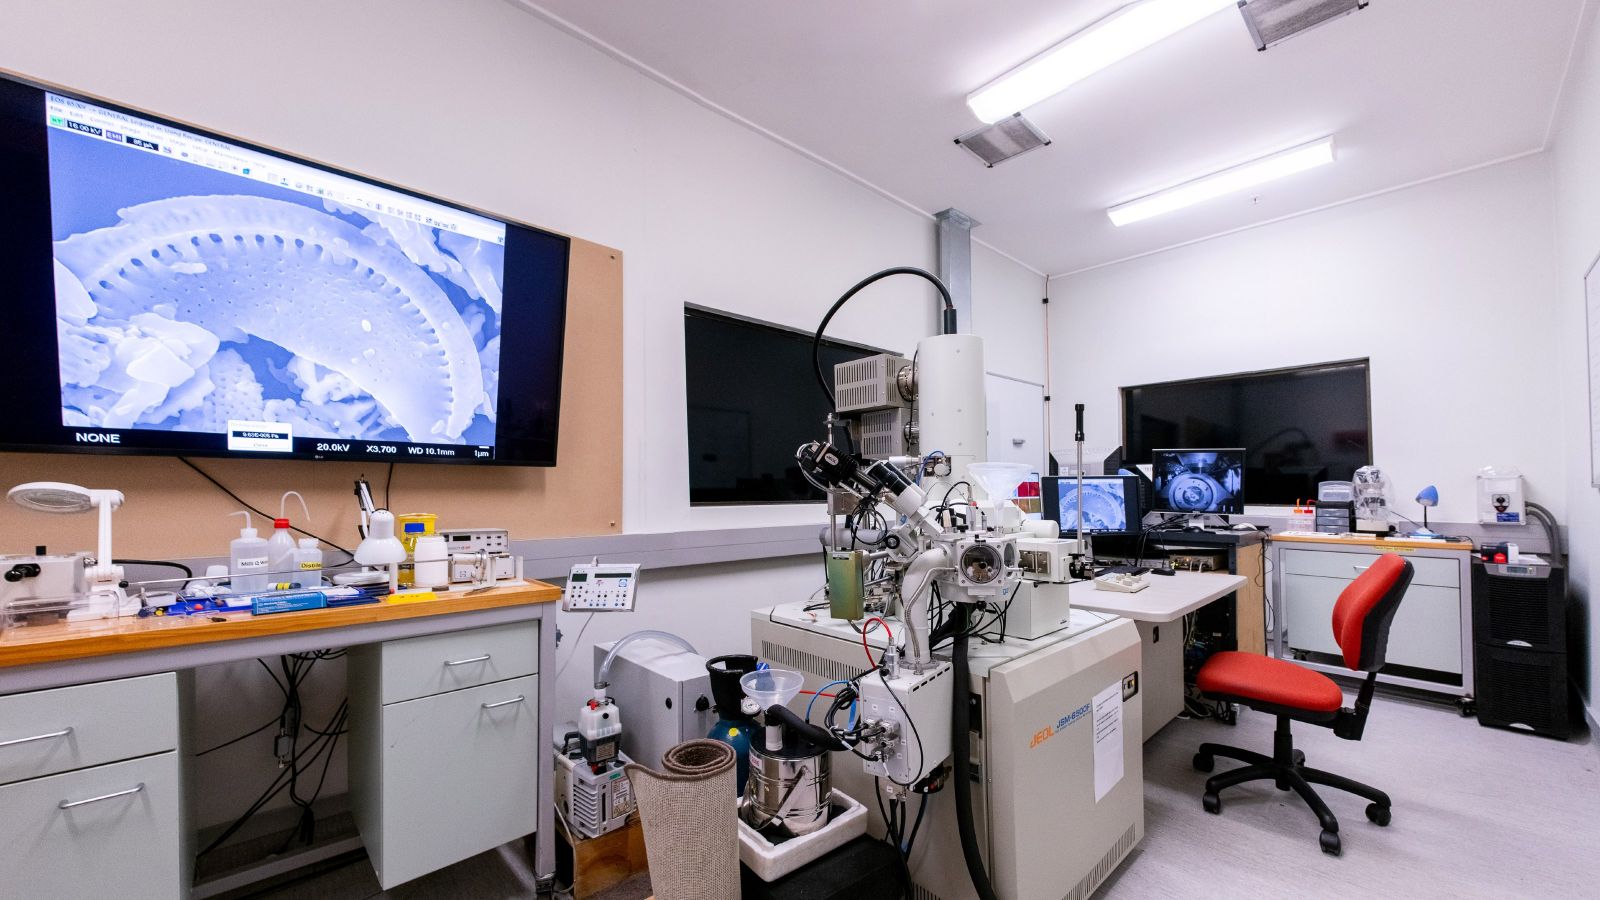 Room with large electron microscope, a large screen, and other equipment